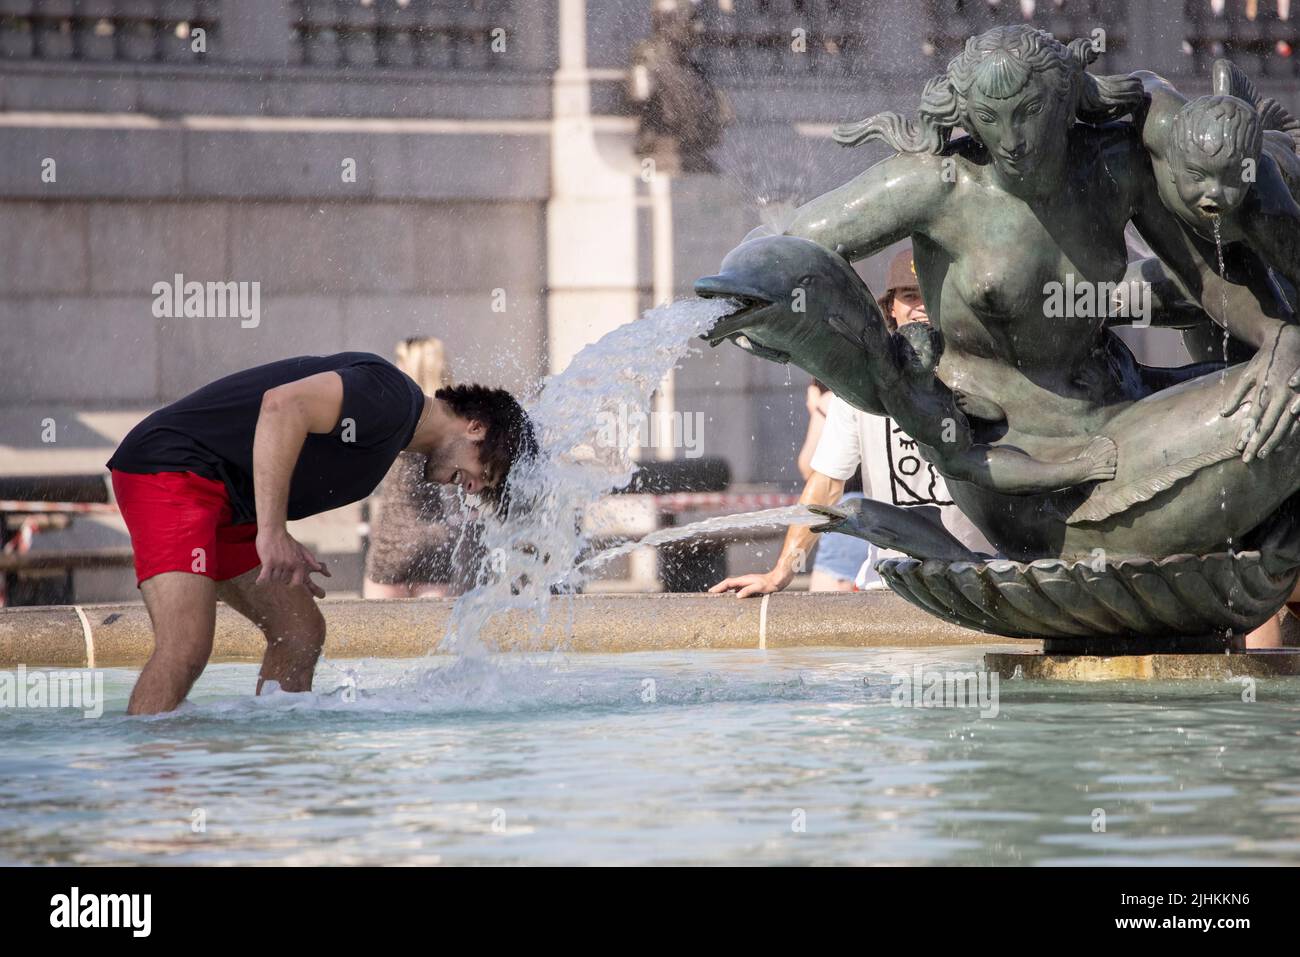 London, UK, 19/07/2022, London Heatwave A tourist cools off in one of the fountains at Trafalgar Square today as temperatures reach 37C in some of the hottest weather to ever hit the United Kingdom. 19th July 2022 London, UK Stock Photo